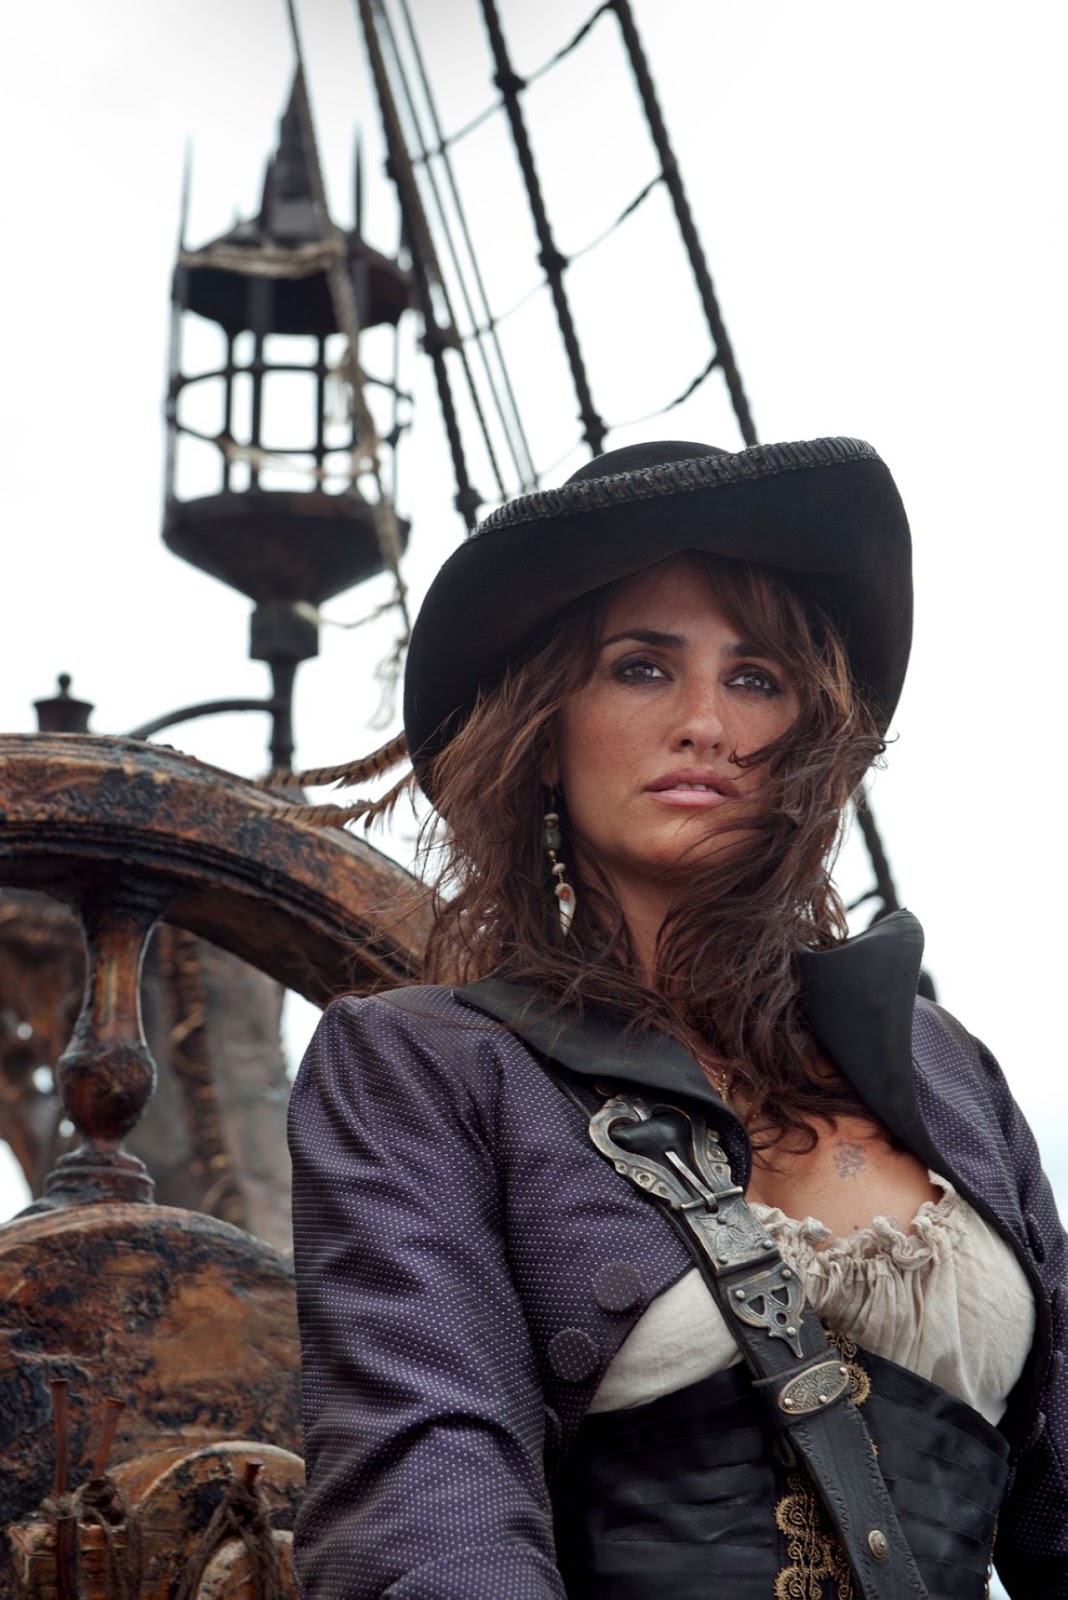 penelope-cruz-the-first-female-pirate-in-on-stranger-tides